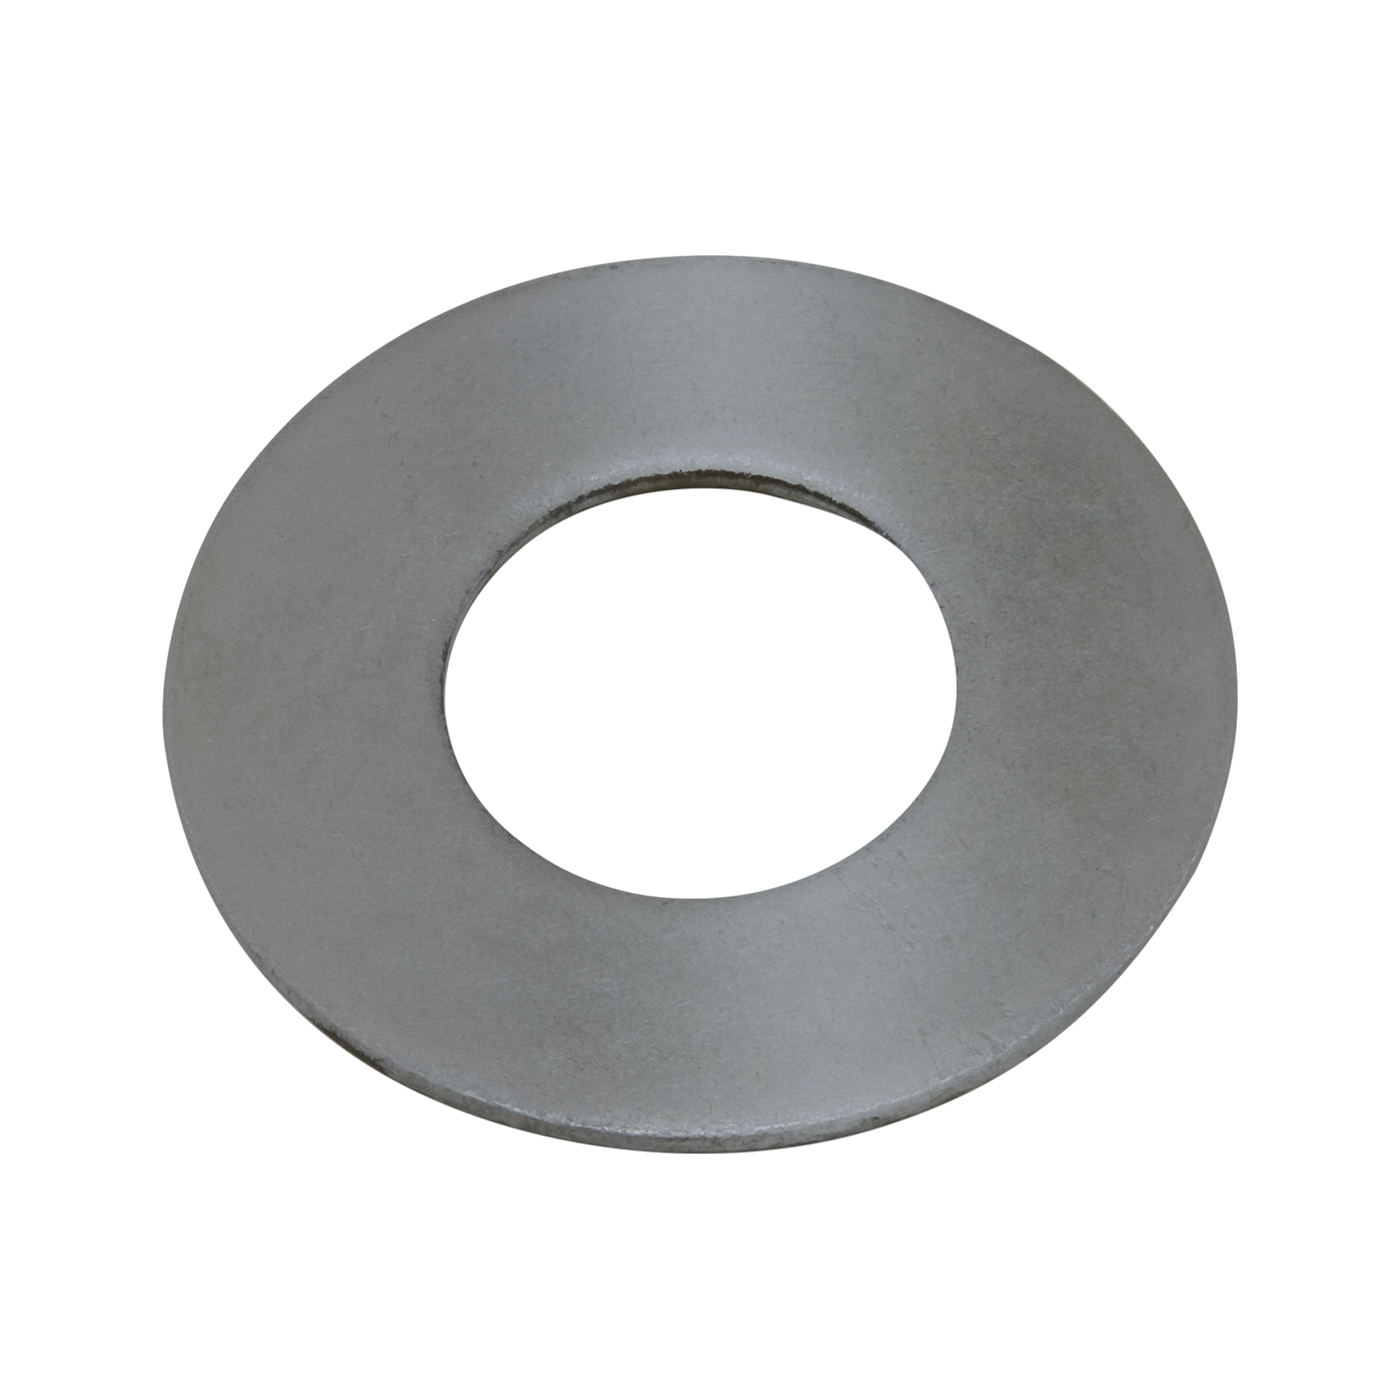 Washer for HD adapter clamshell puller tool.